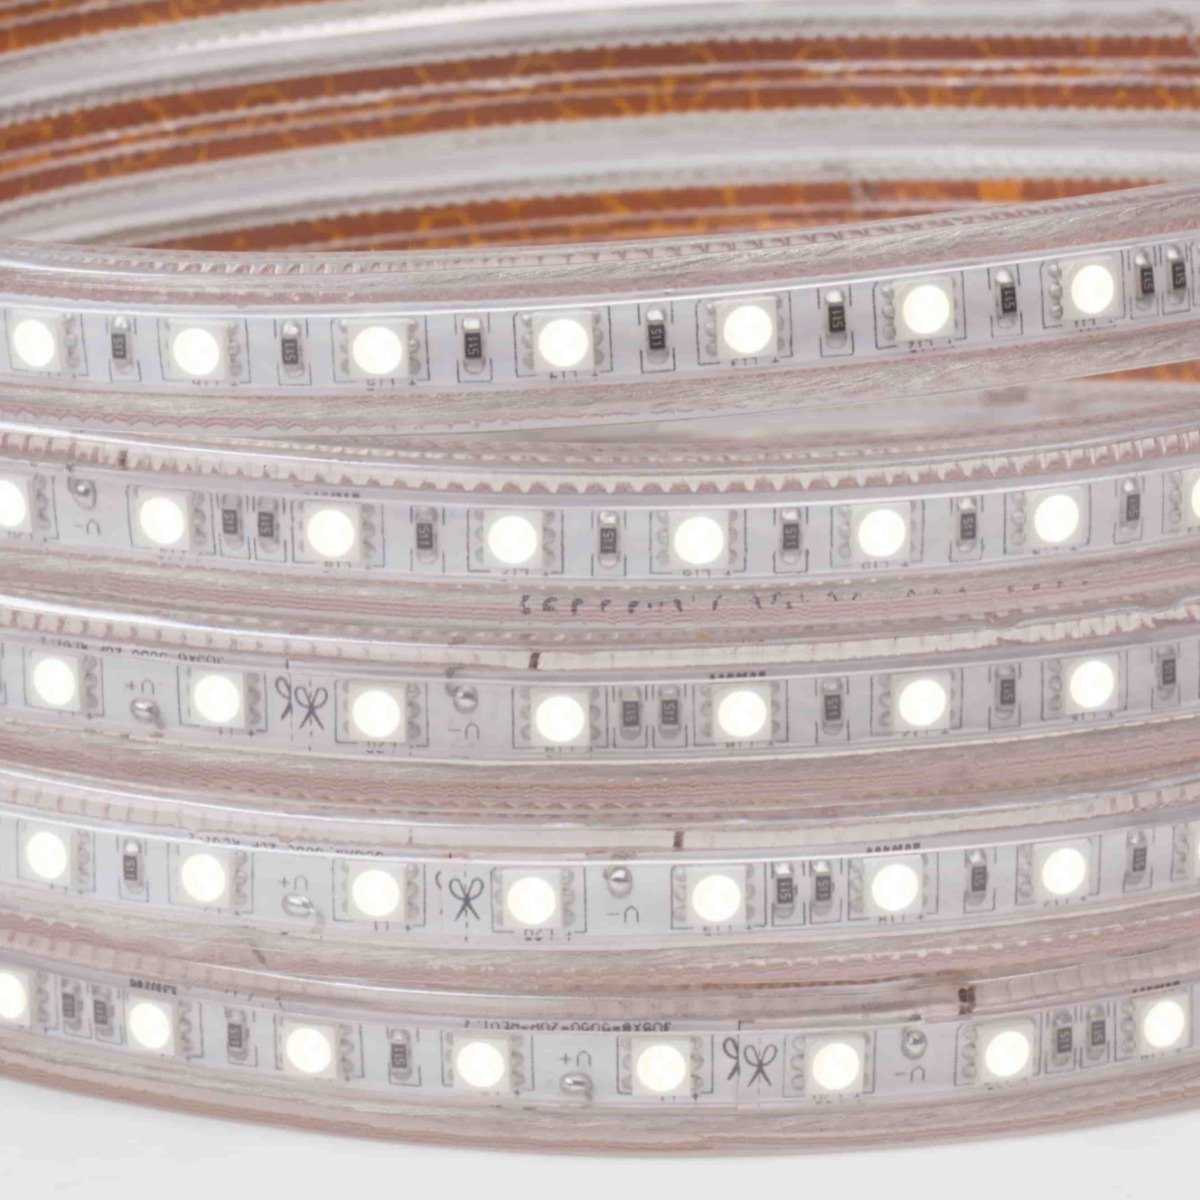 Petite 120V Neon LED Strip in Cool White from Lumilum